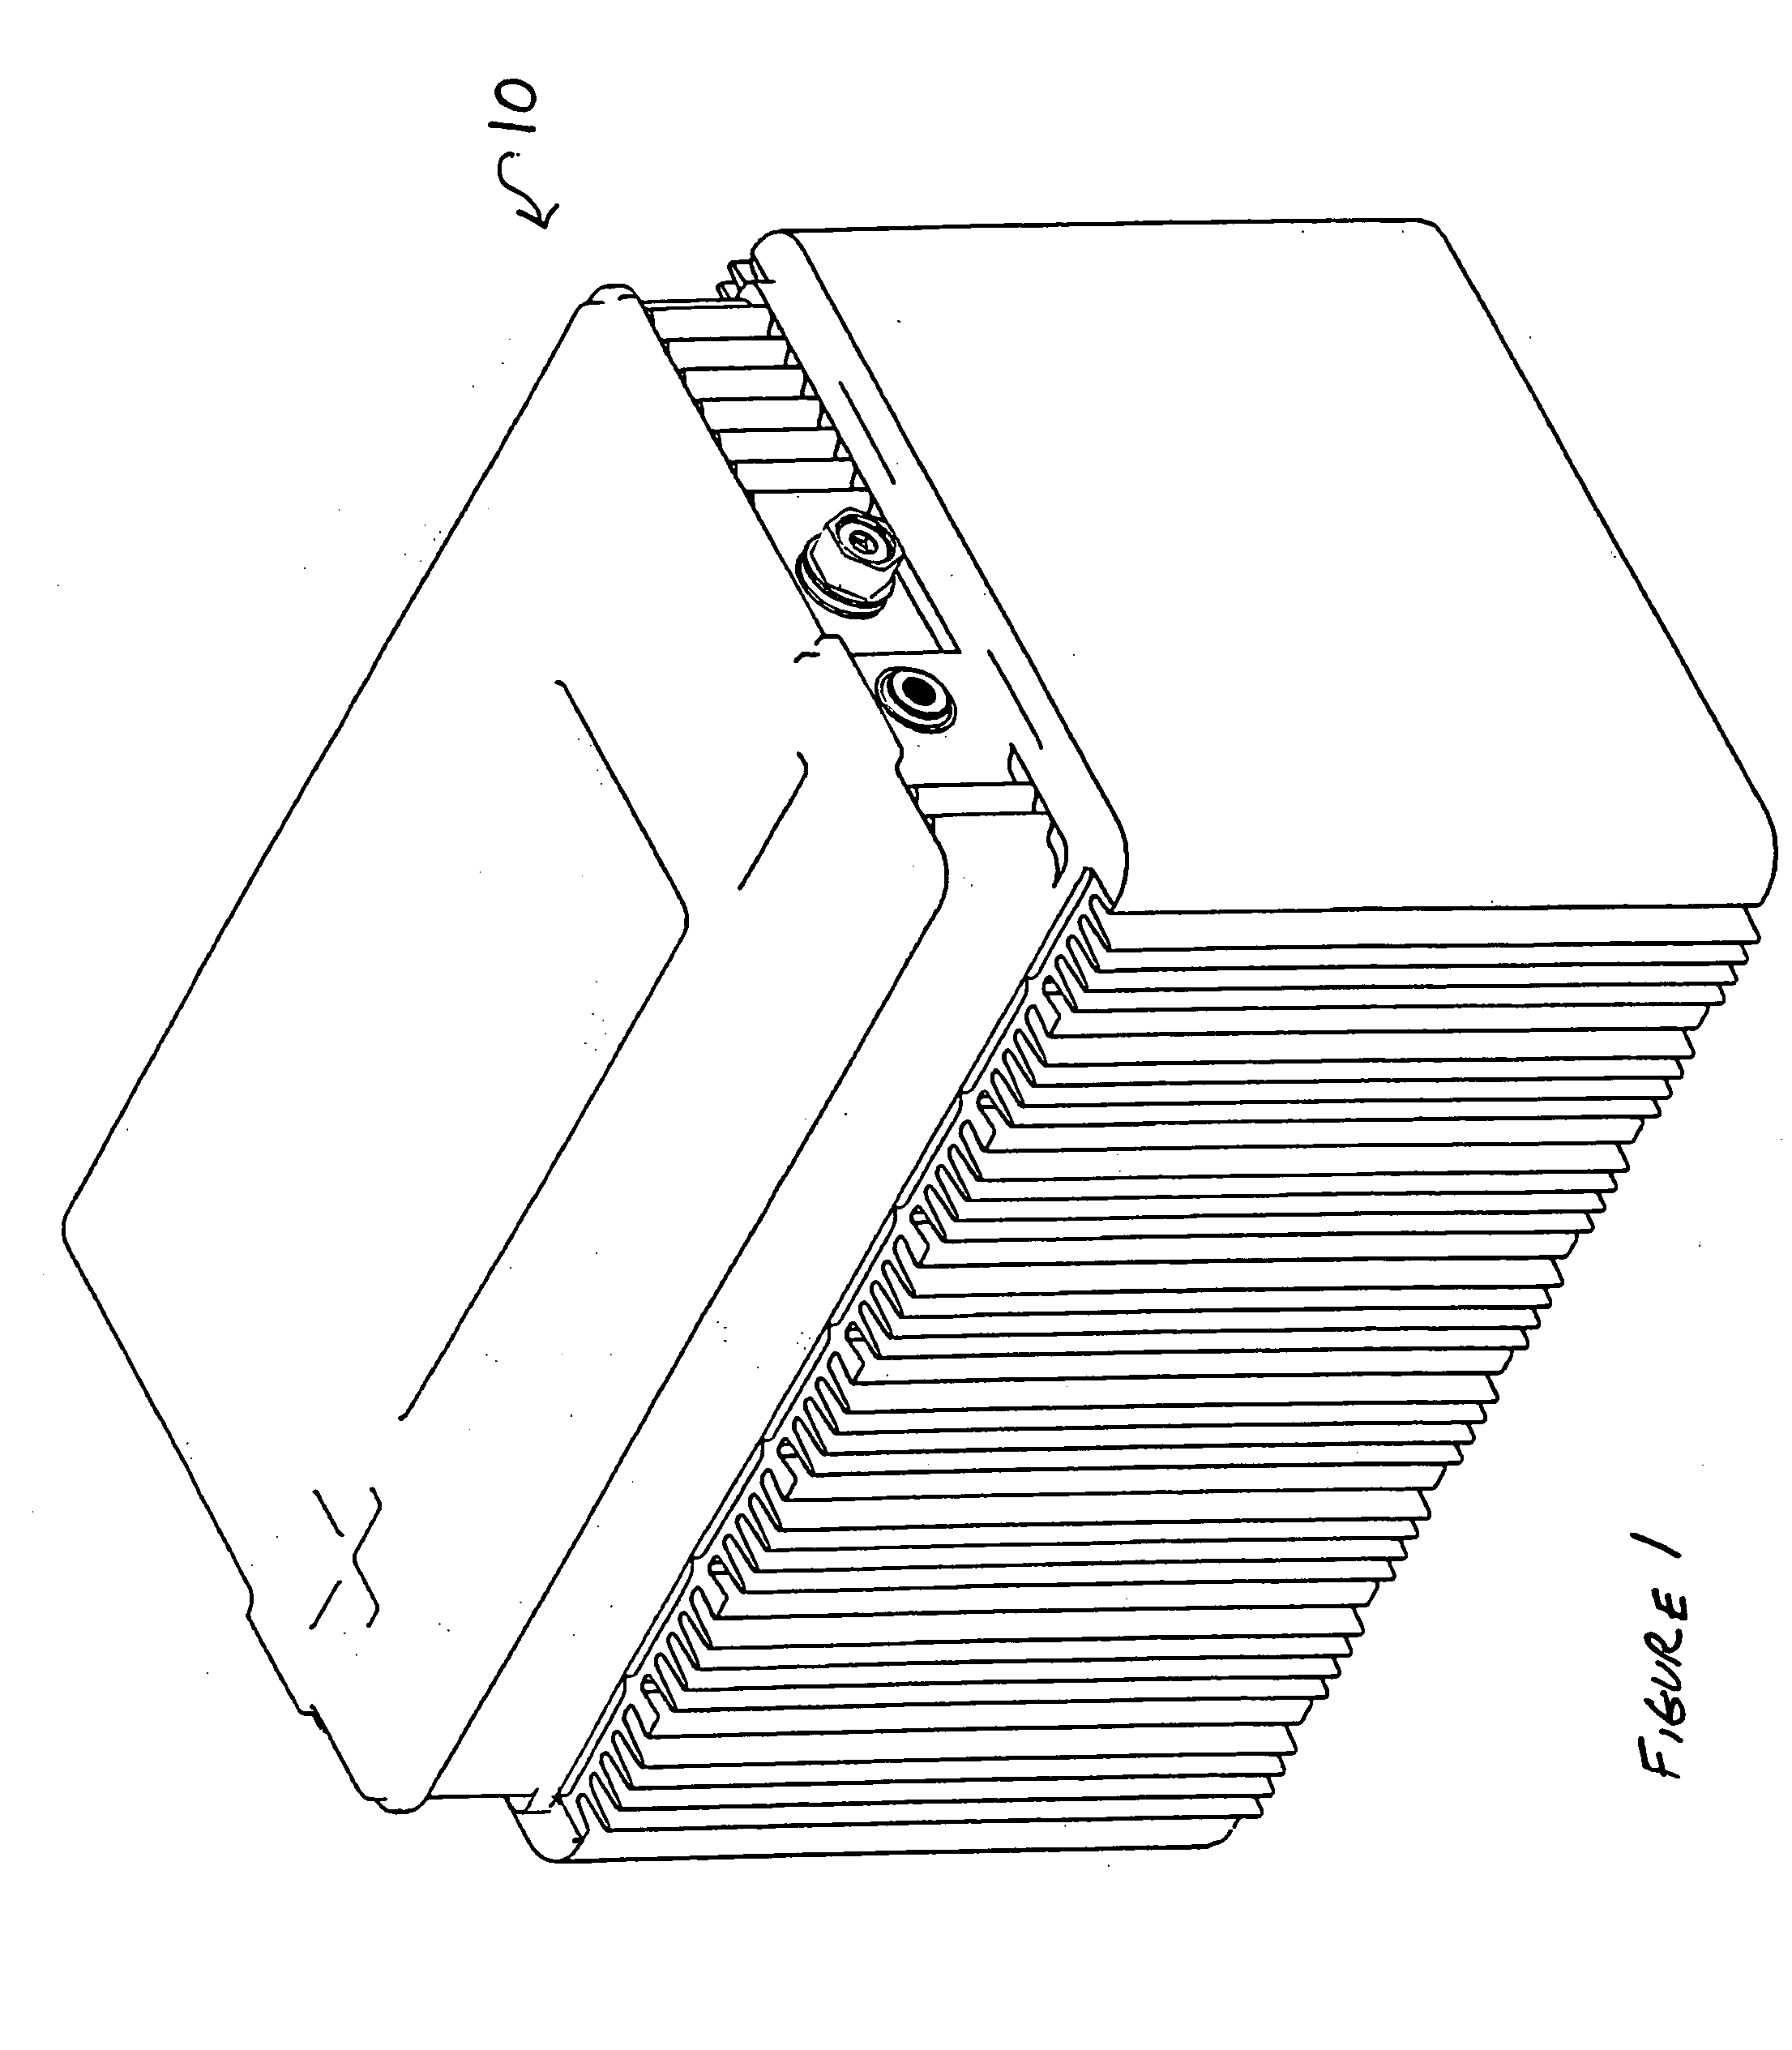 Battery assembly with heat sink